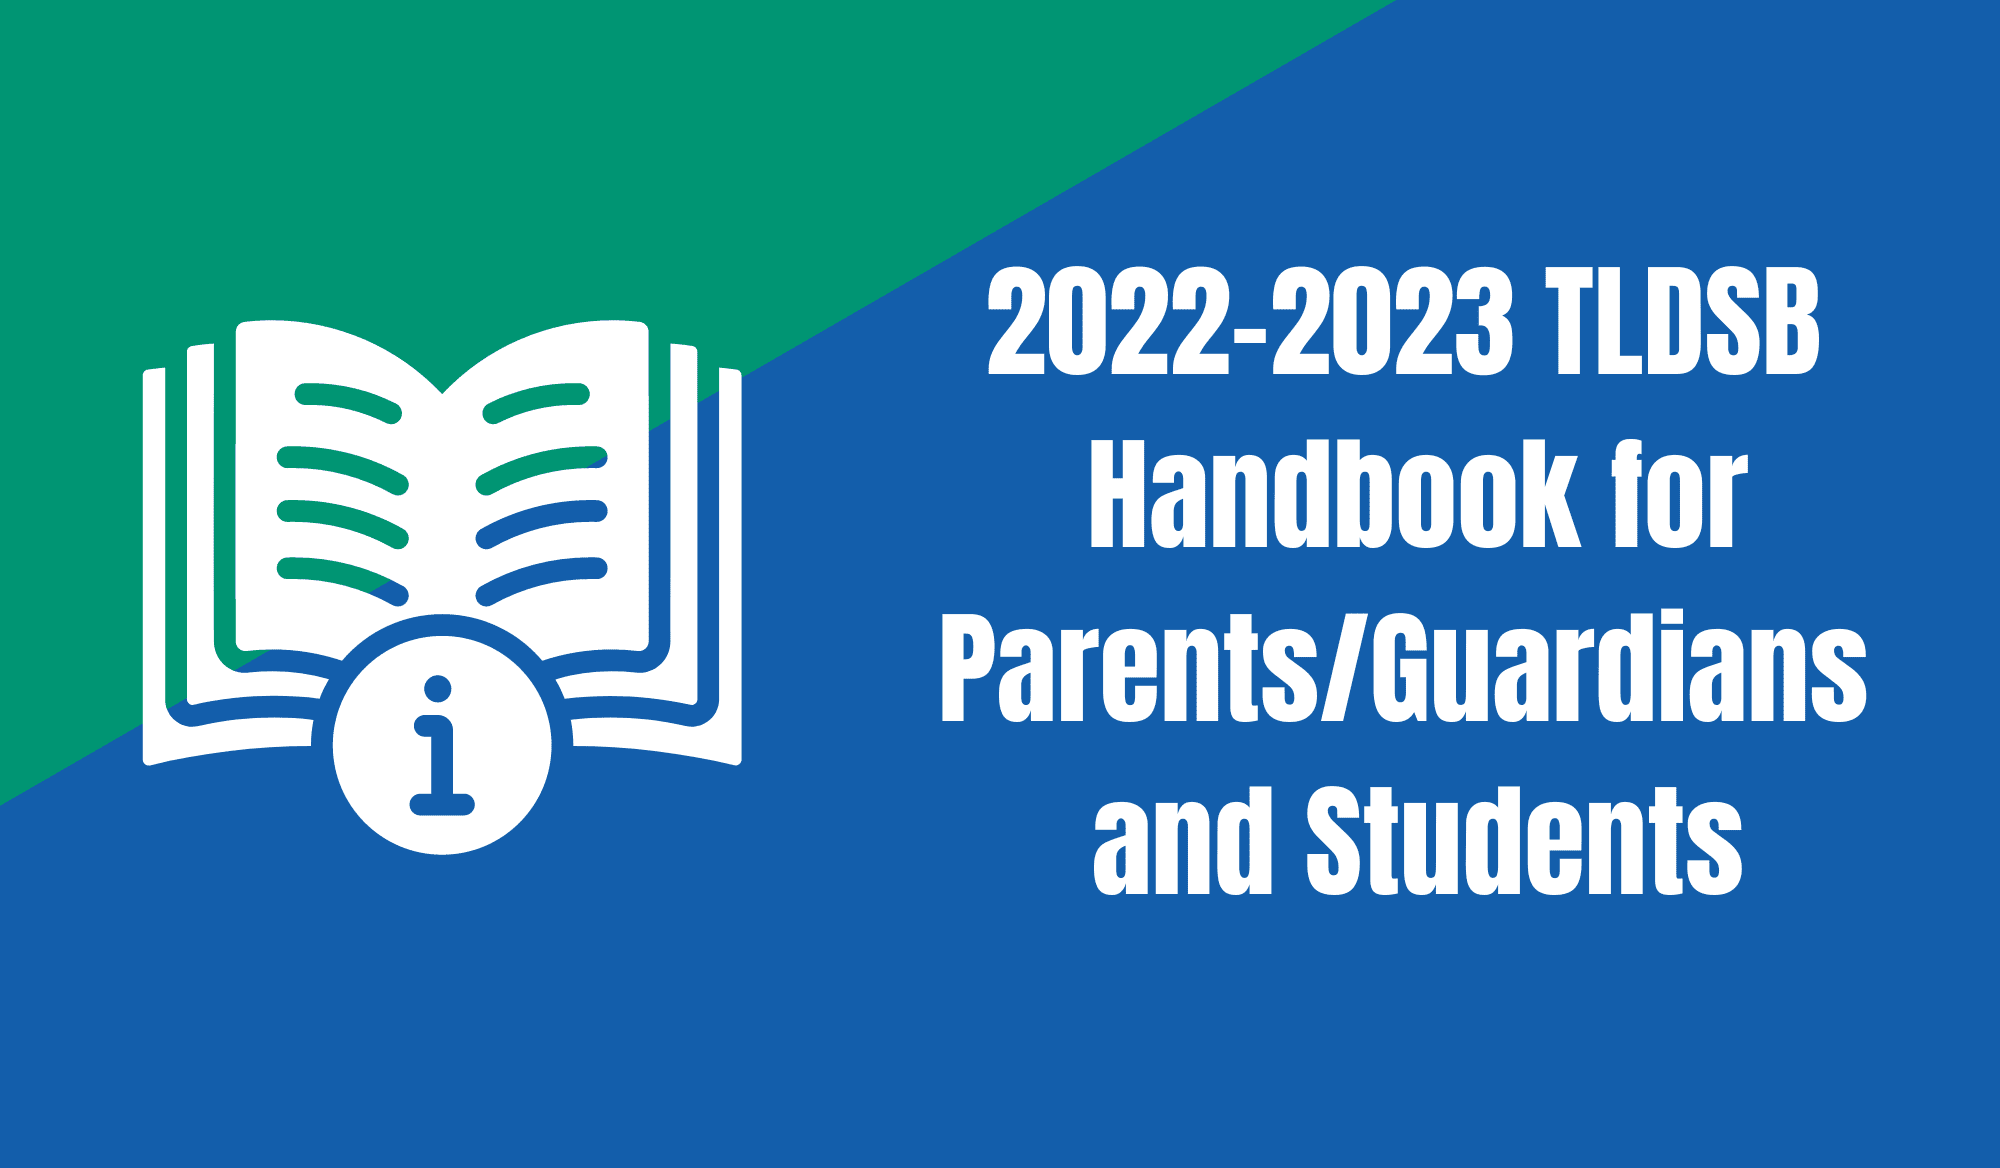 Button with text: 2022-2023 TLDSB Handbook for Parents/Guardians and Students